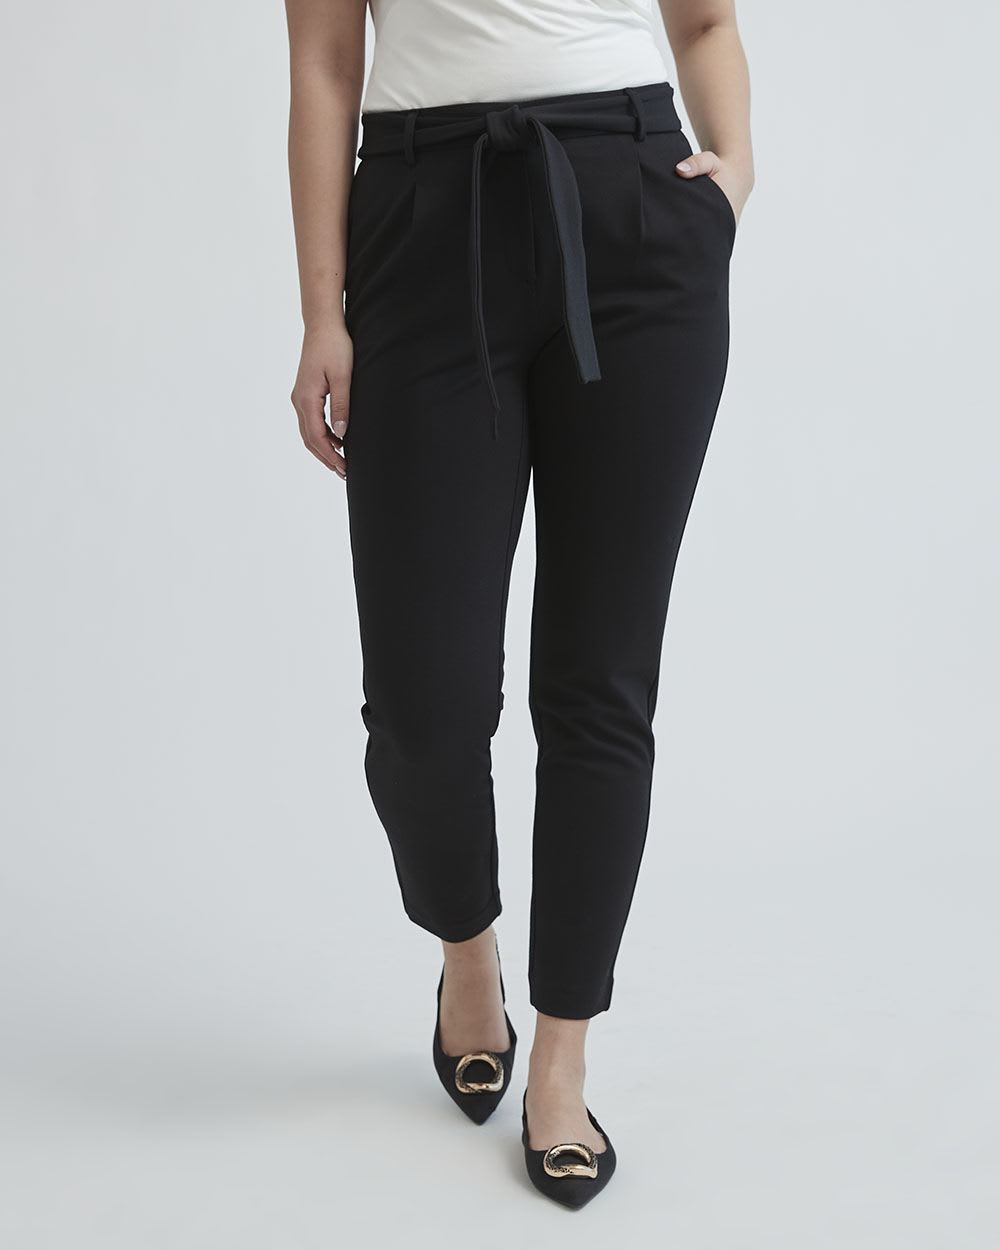 Mid-Rise Dressy Jogger Pant with Sash - 29